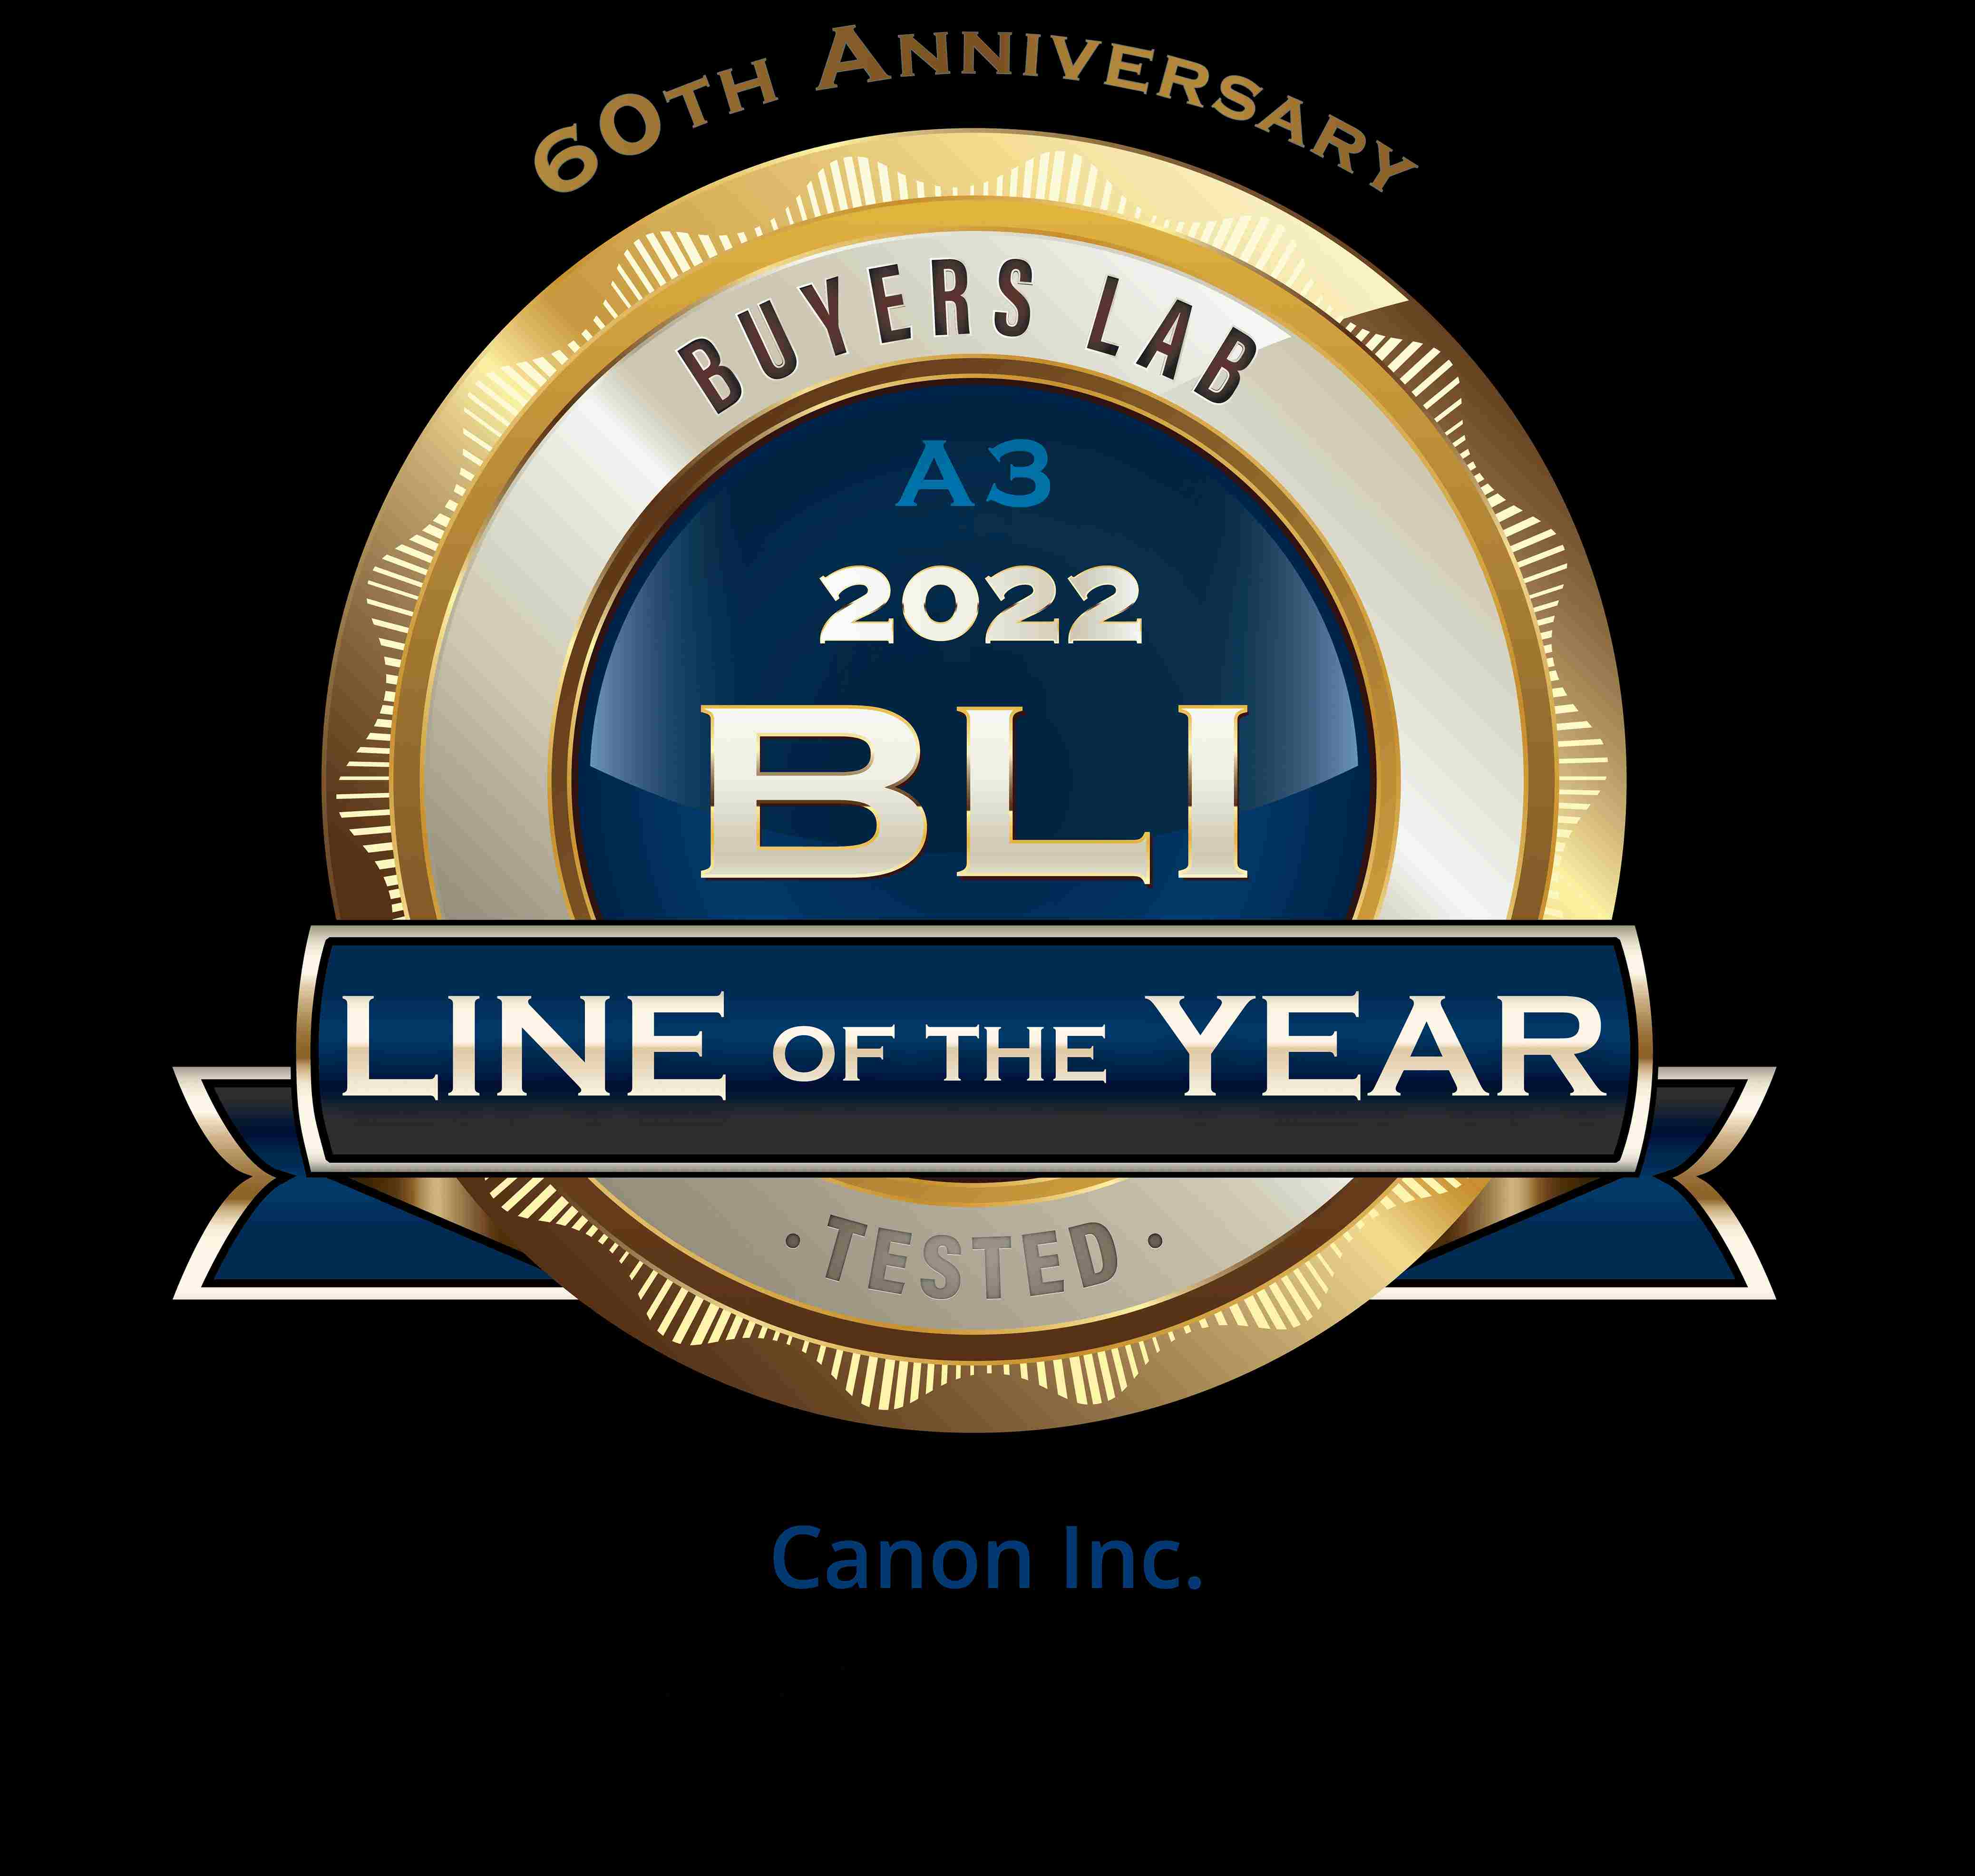 Canon Wins the BLI 2022 A3 Line of the Year Award